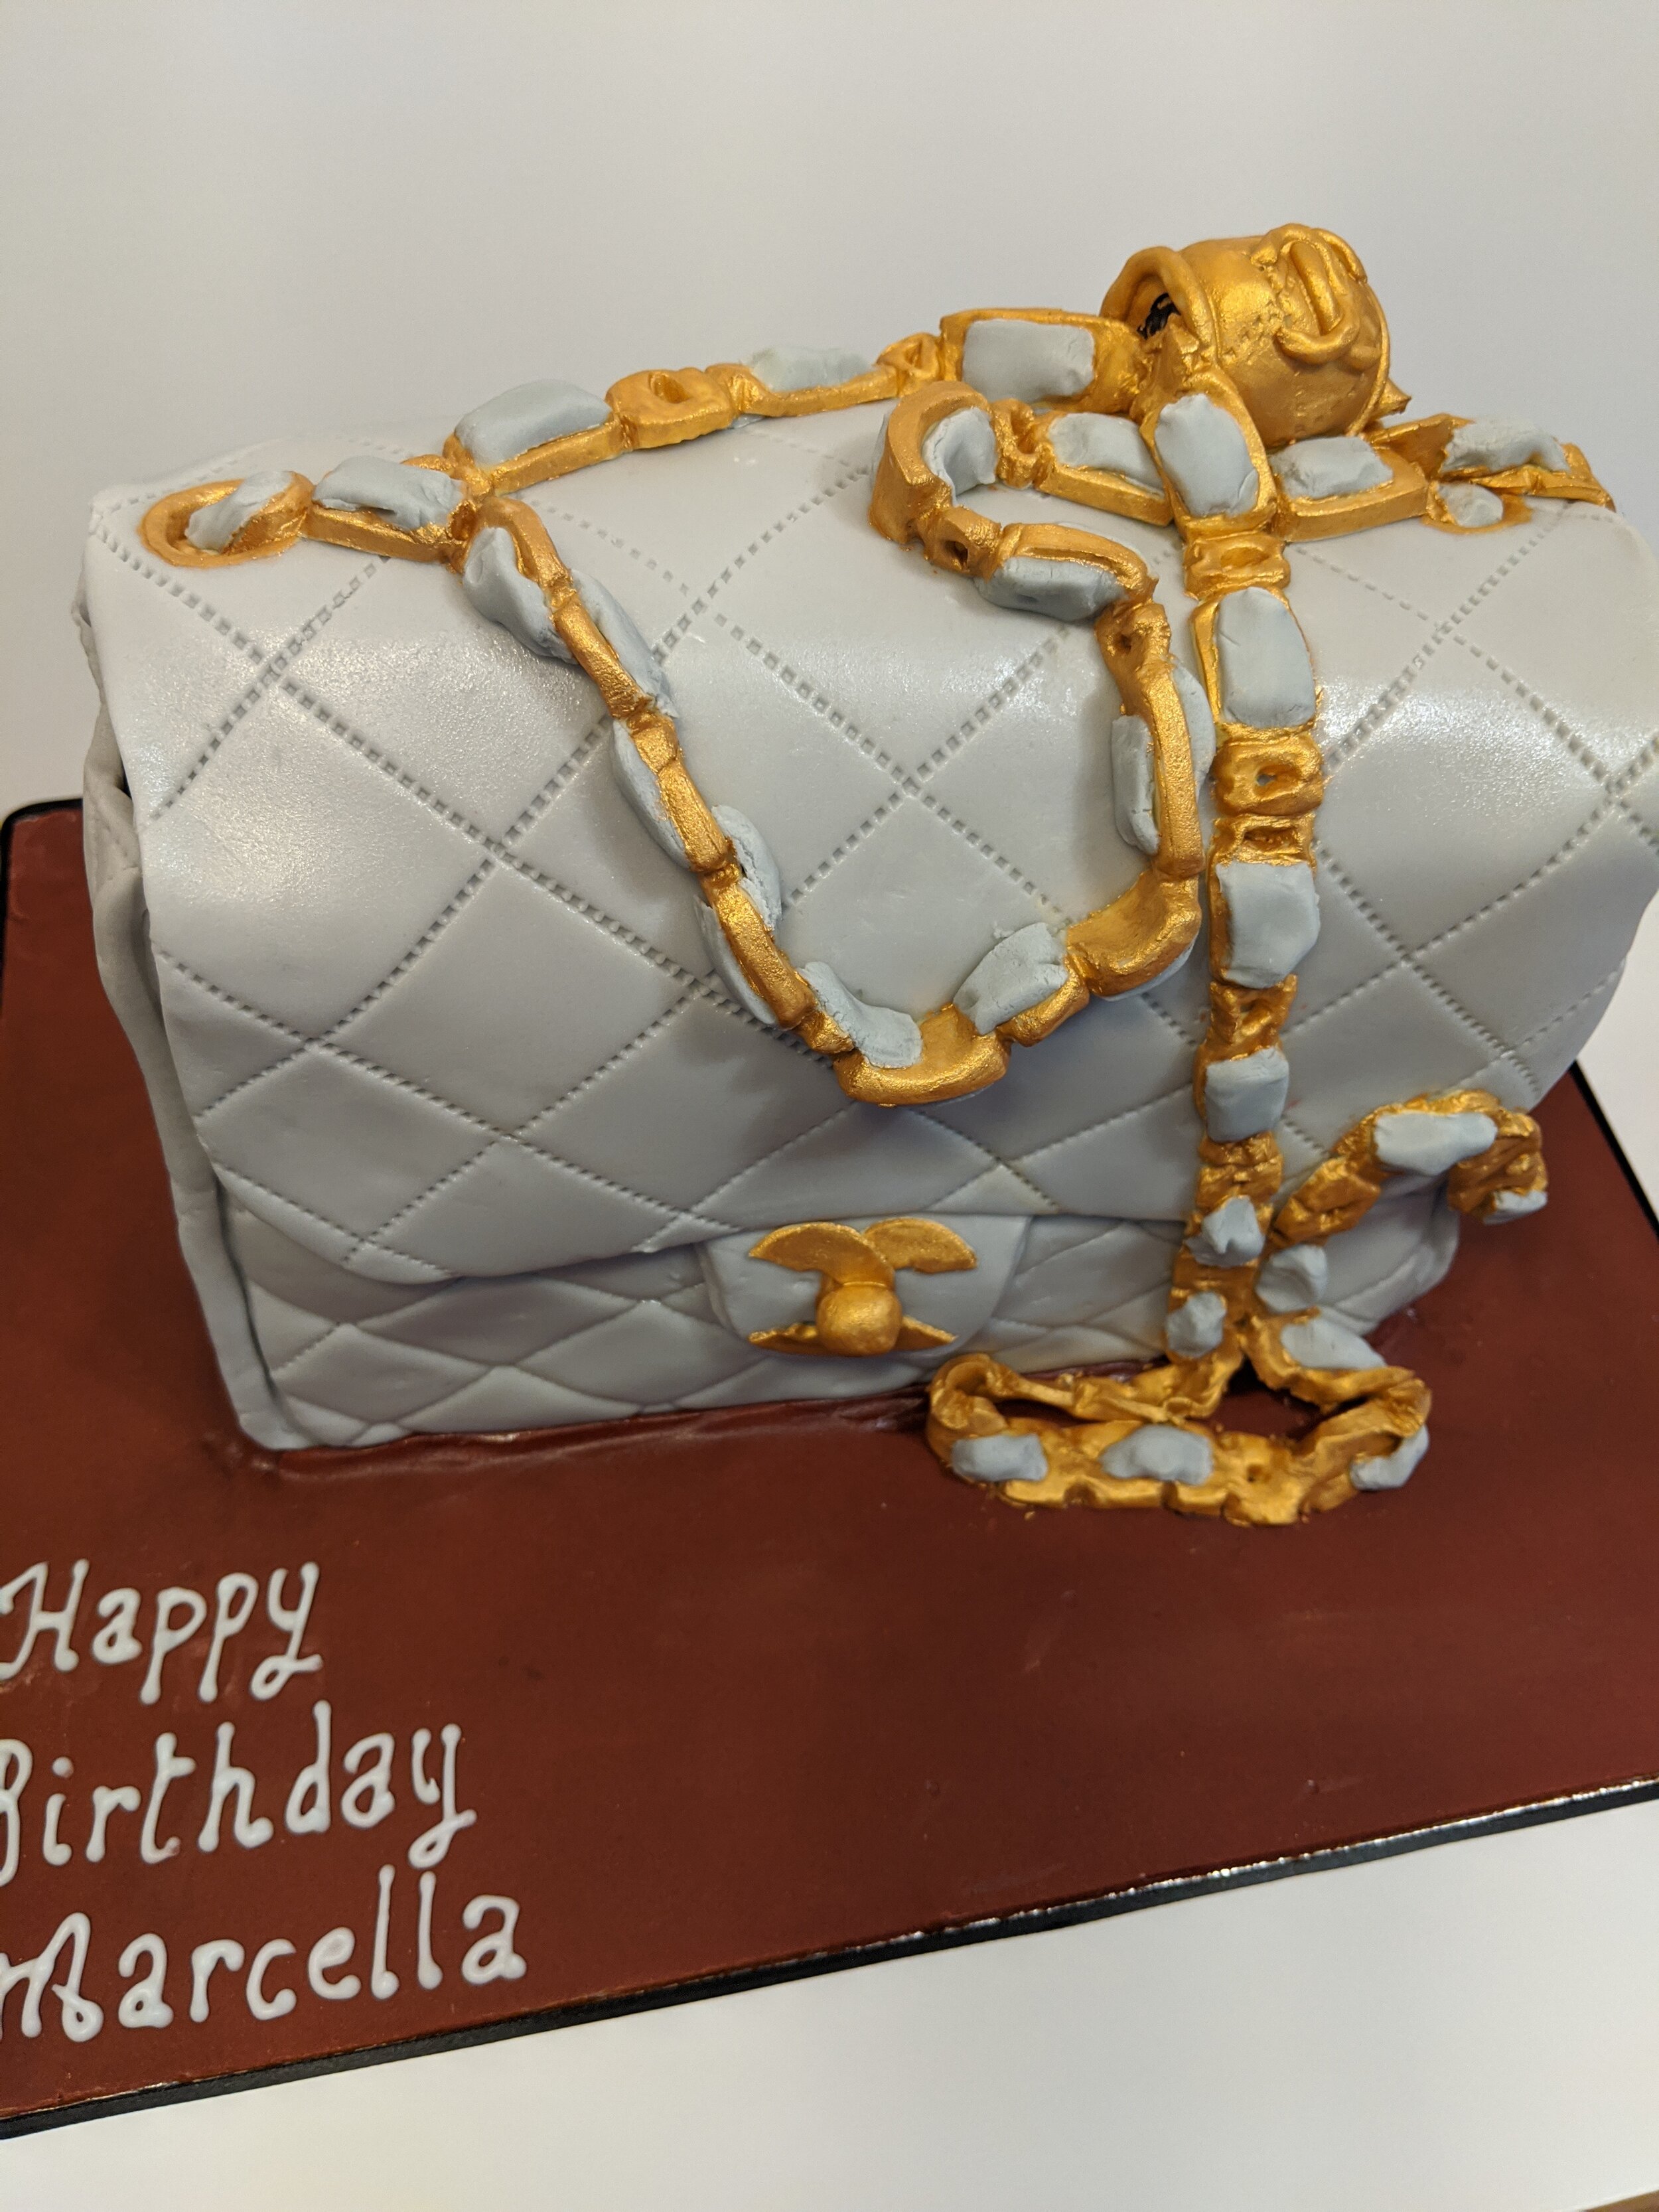 Handbag Cake for Eve's 21st Birthday | This is the second ve… | Flickr